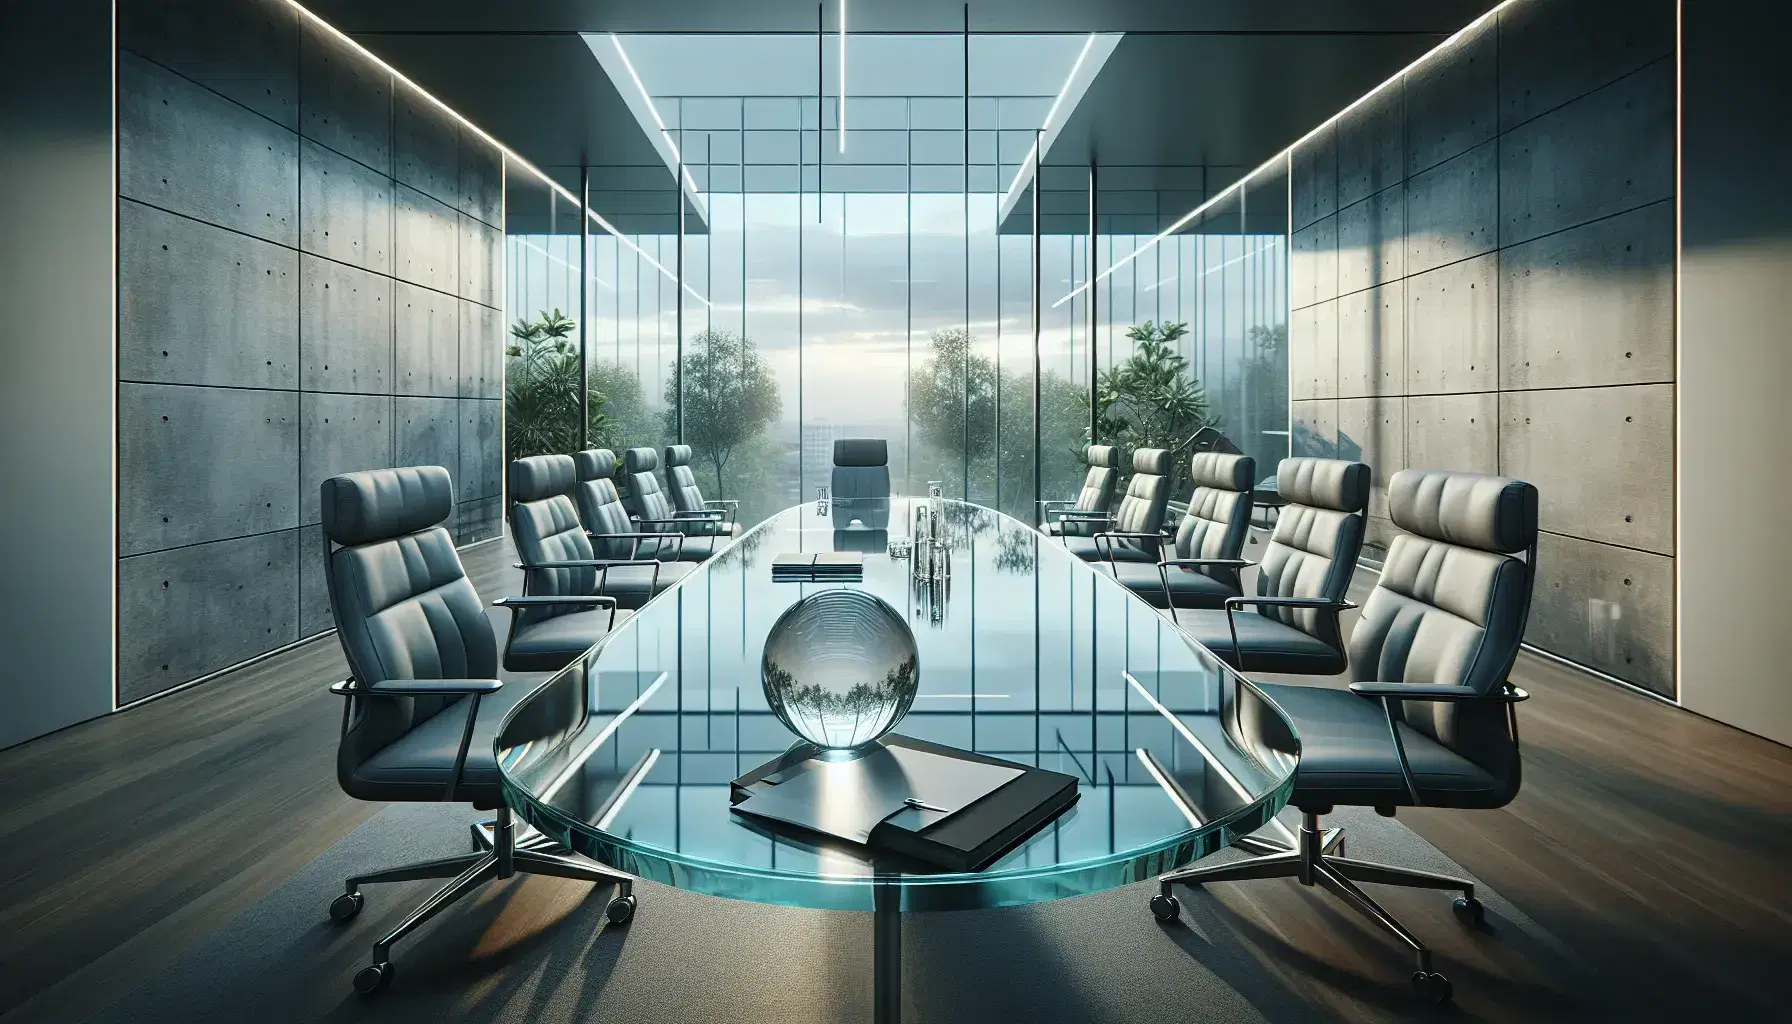 Modern boardroom with oval glass table, ergonomic gray chairs, and a person holding a glass sphere, with a backdrop of a window overlooking a serene sky and treetops.